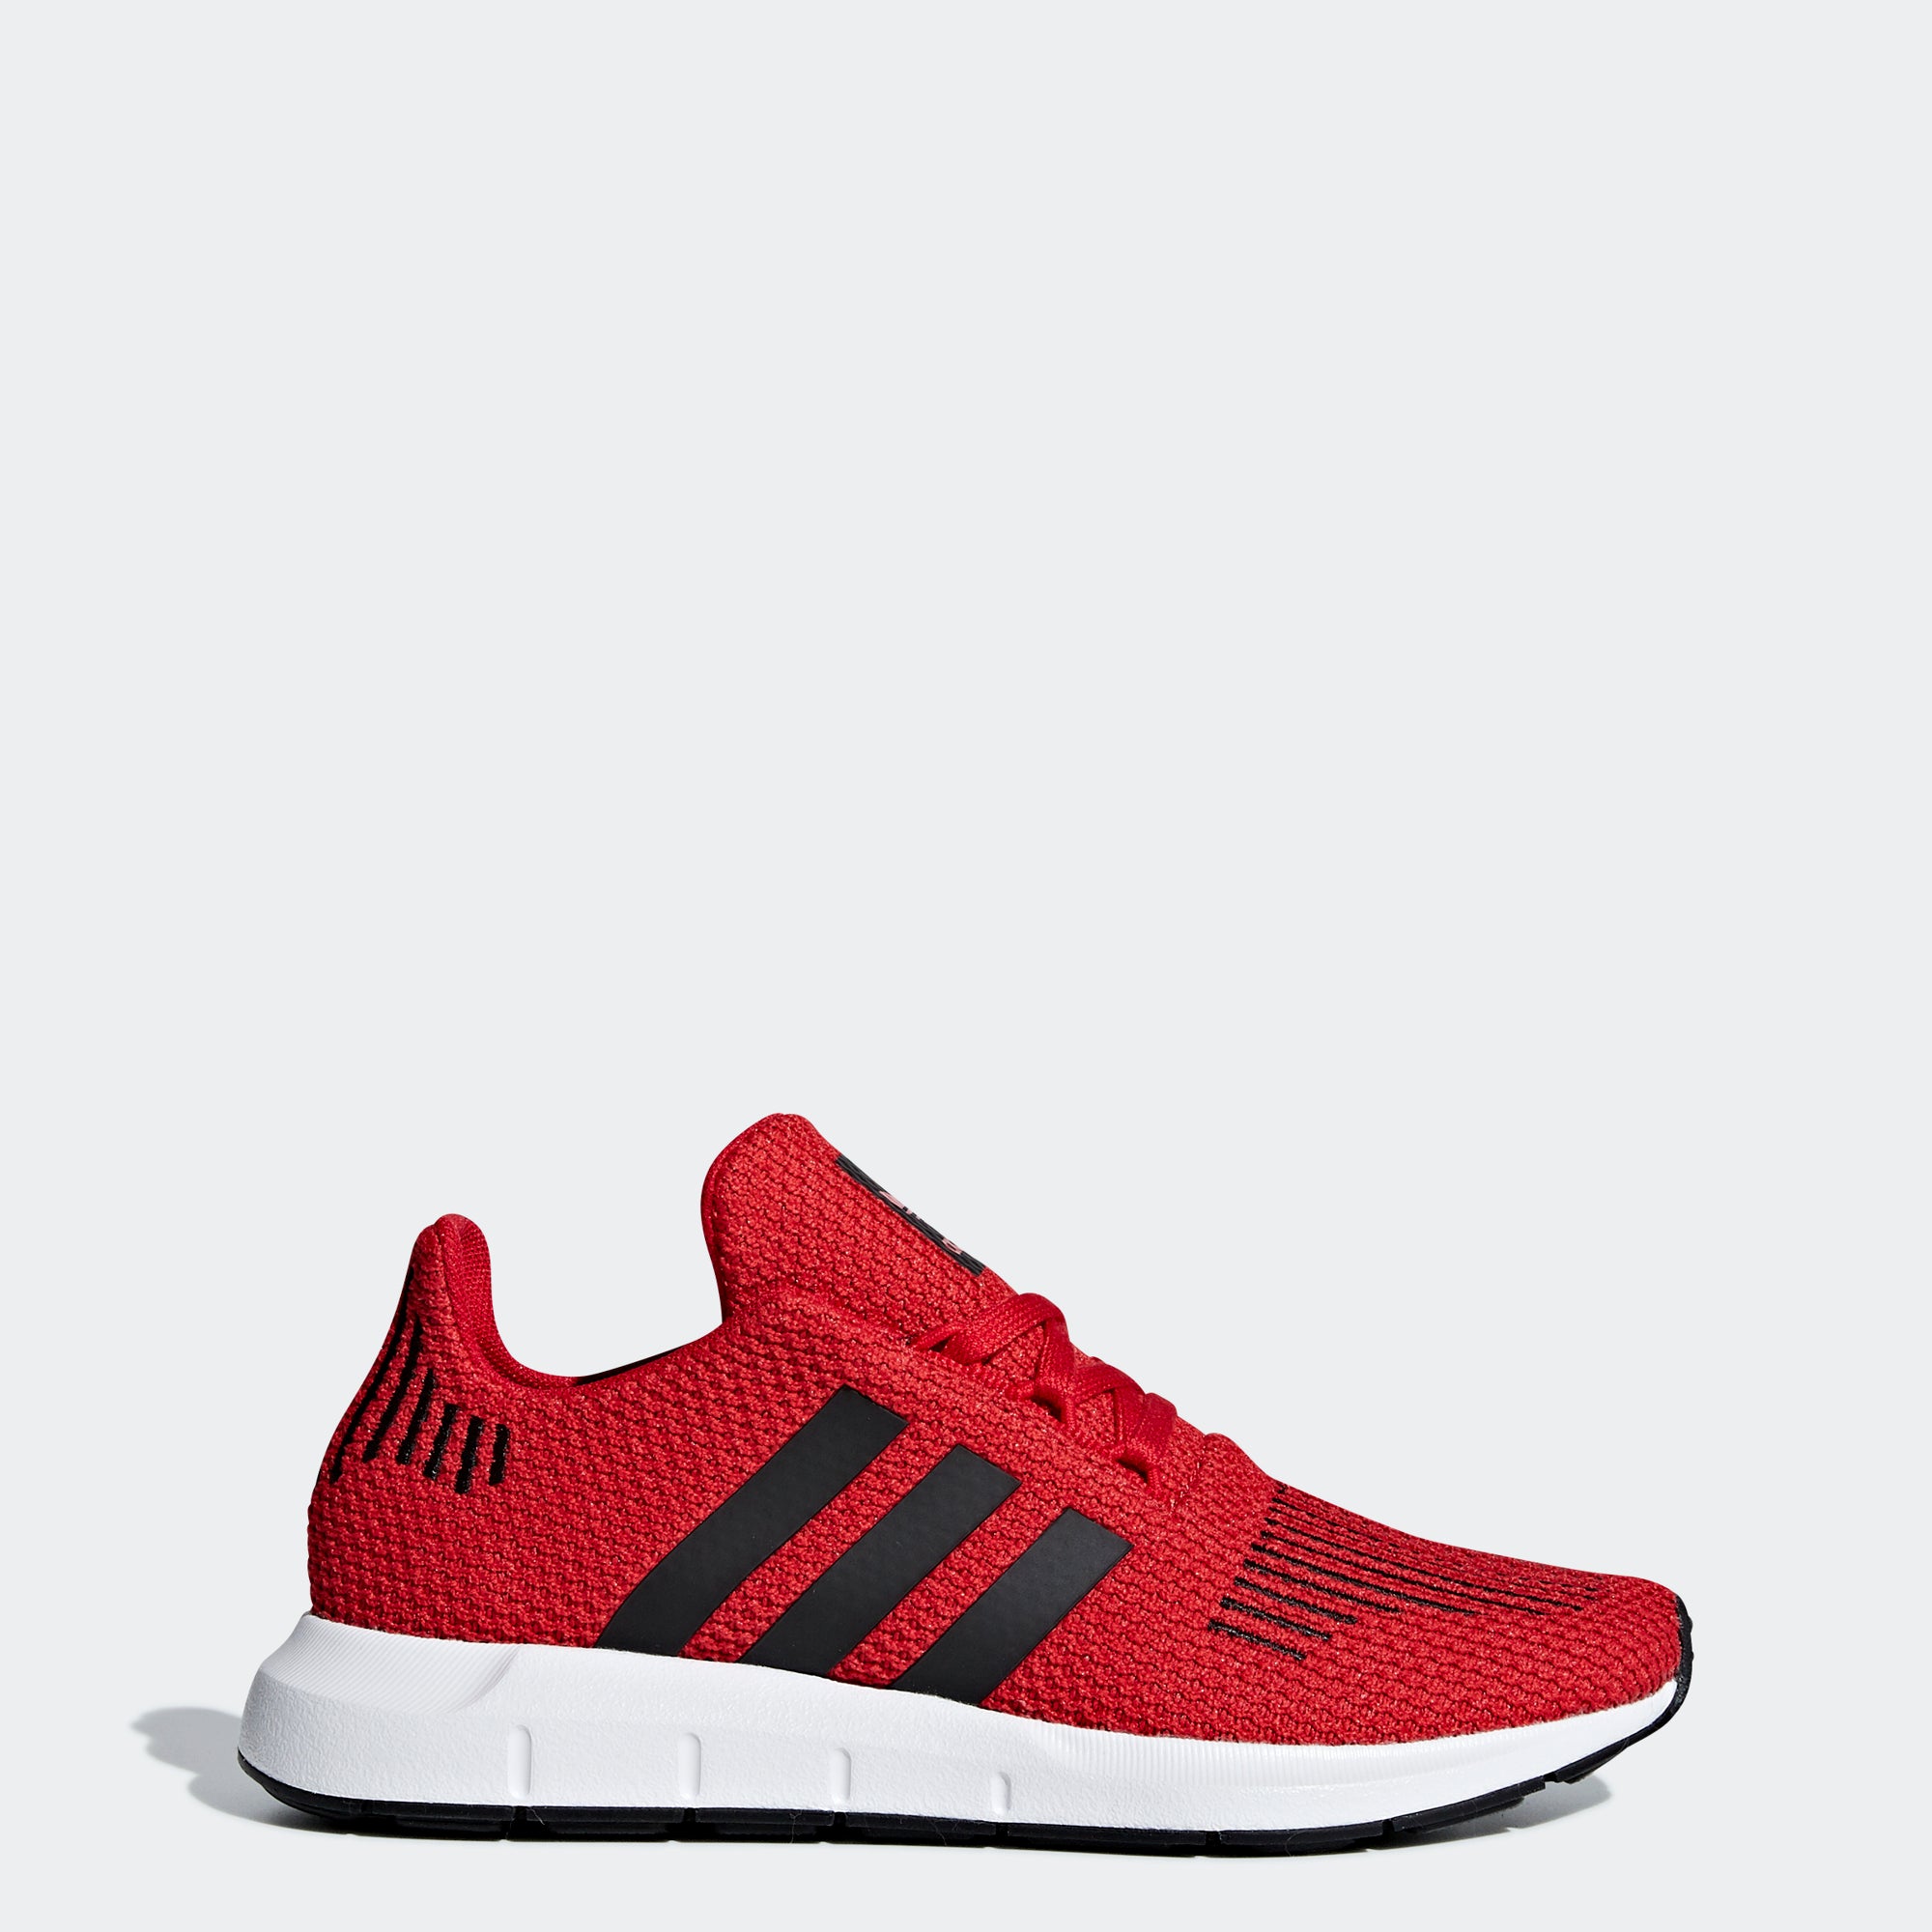 adidas red swift run shoes